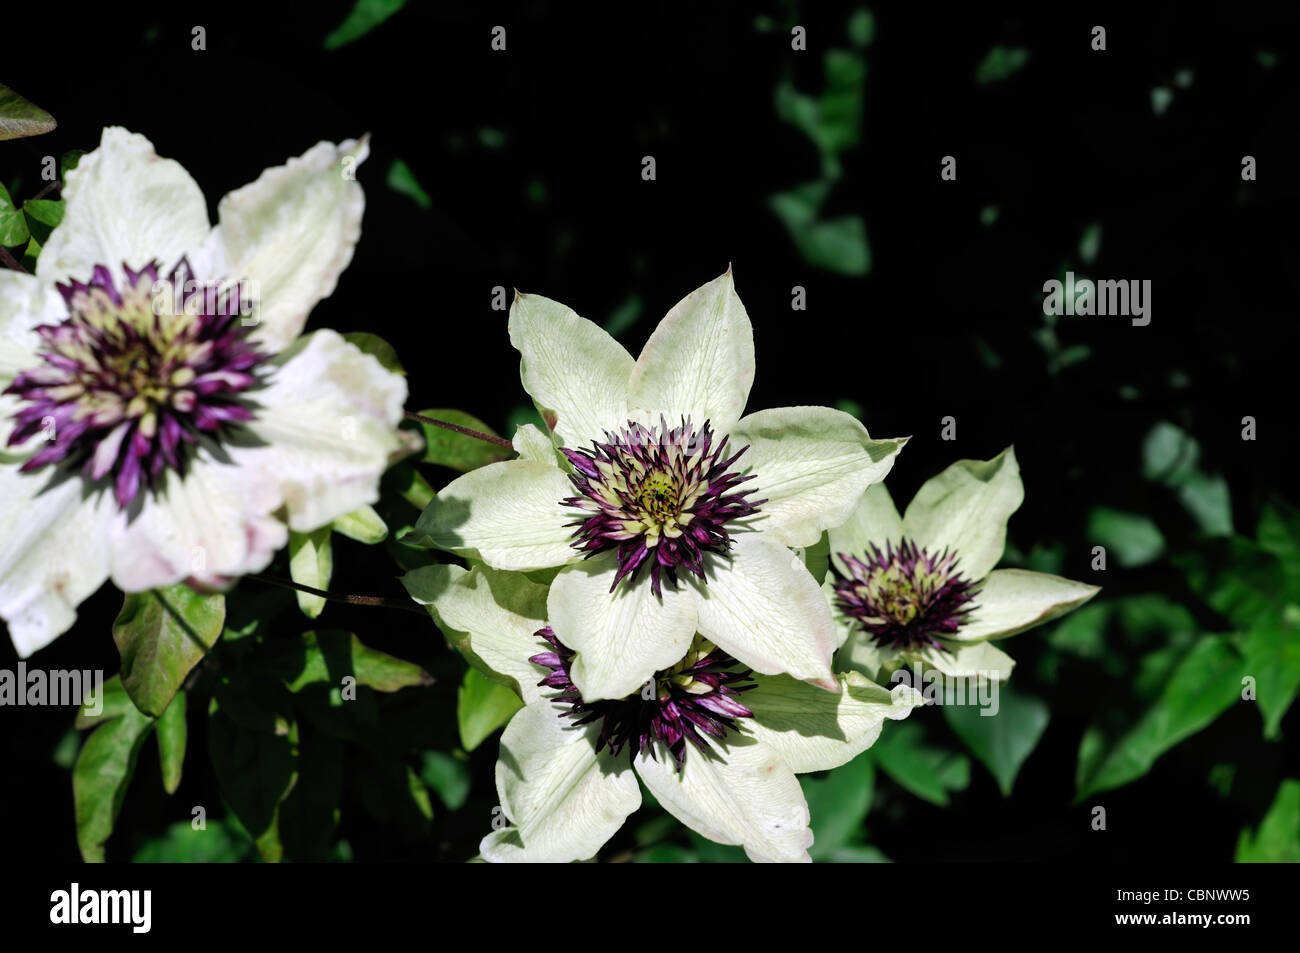 Clematis Sieboldii Florida purple white flowers fully double climber climbing plant perennial flower bloom blossom white purple Stock Photo